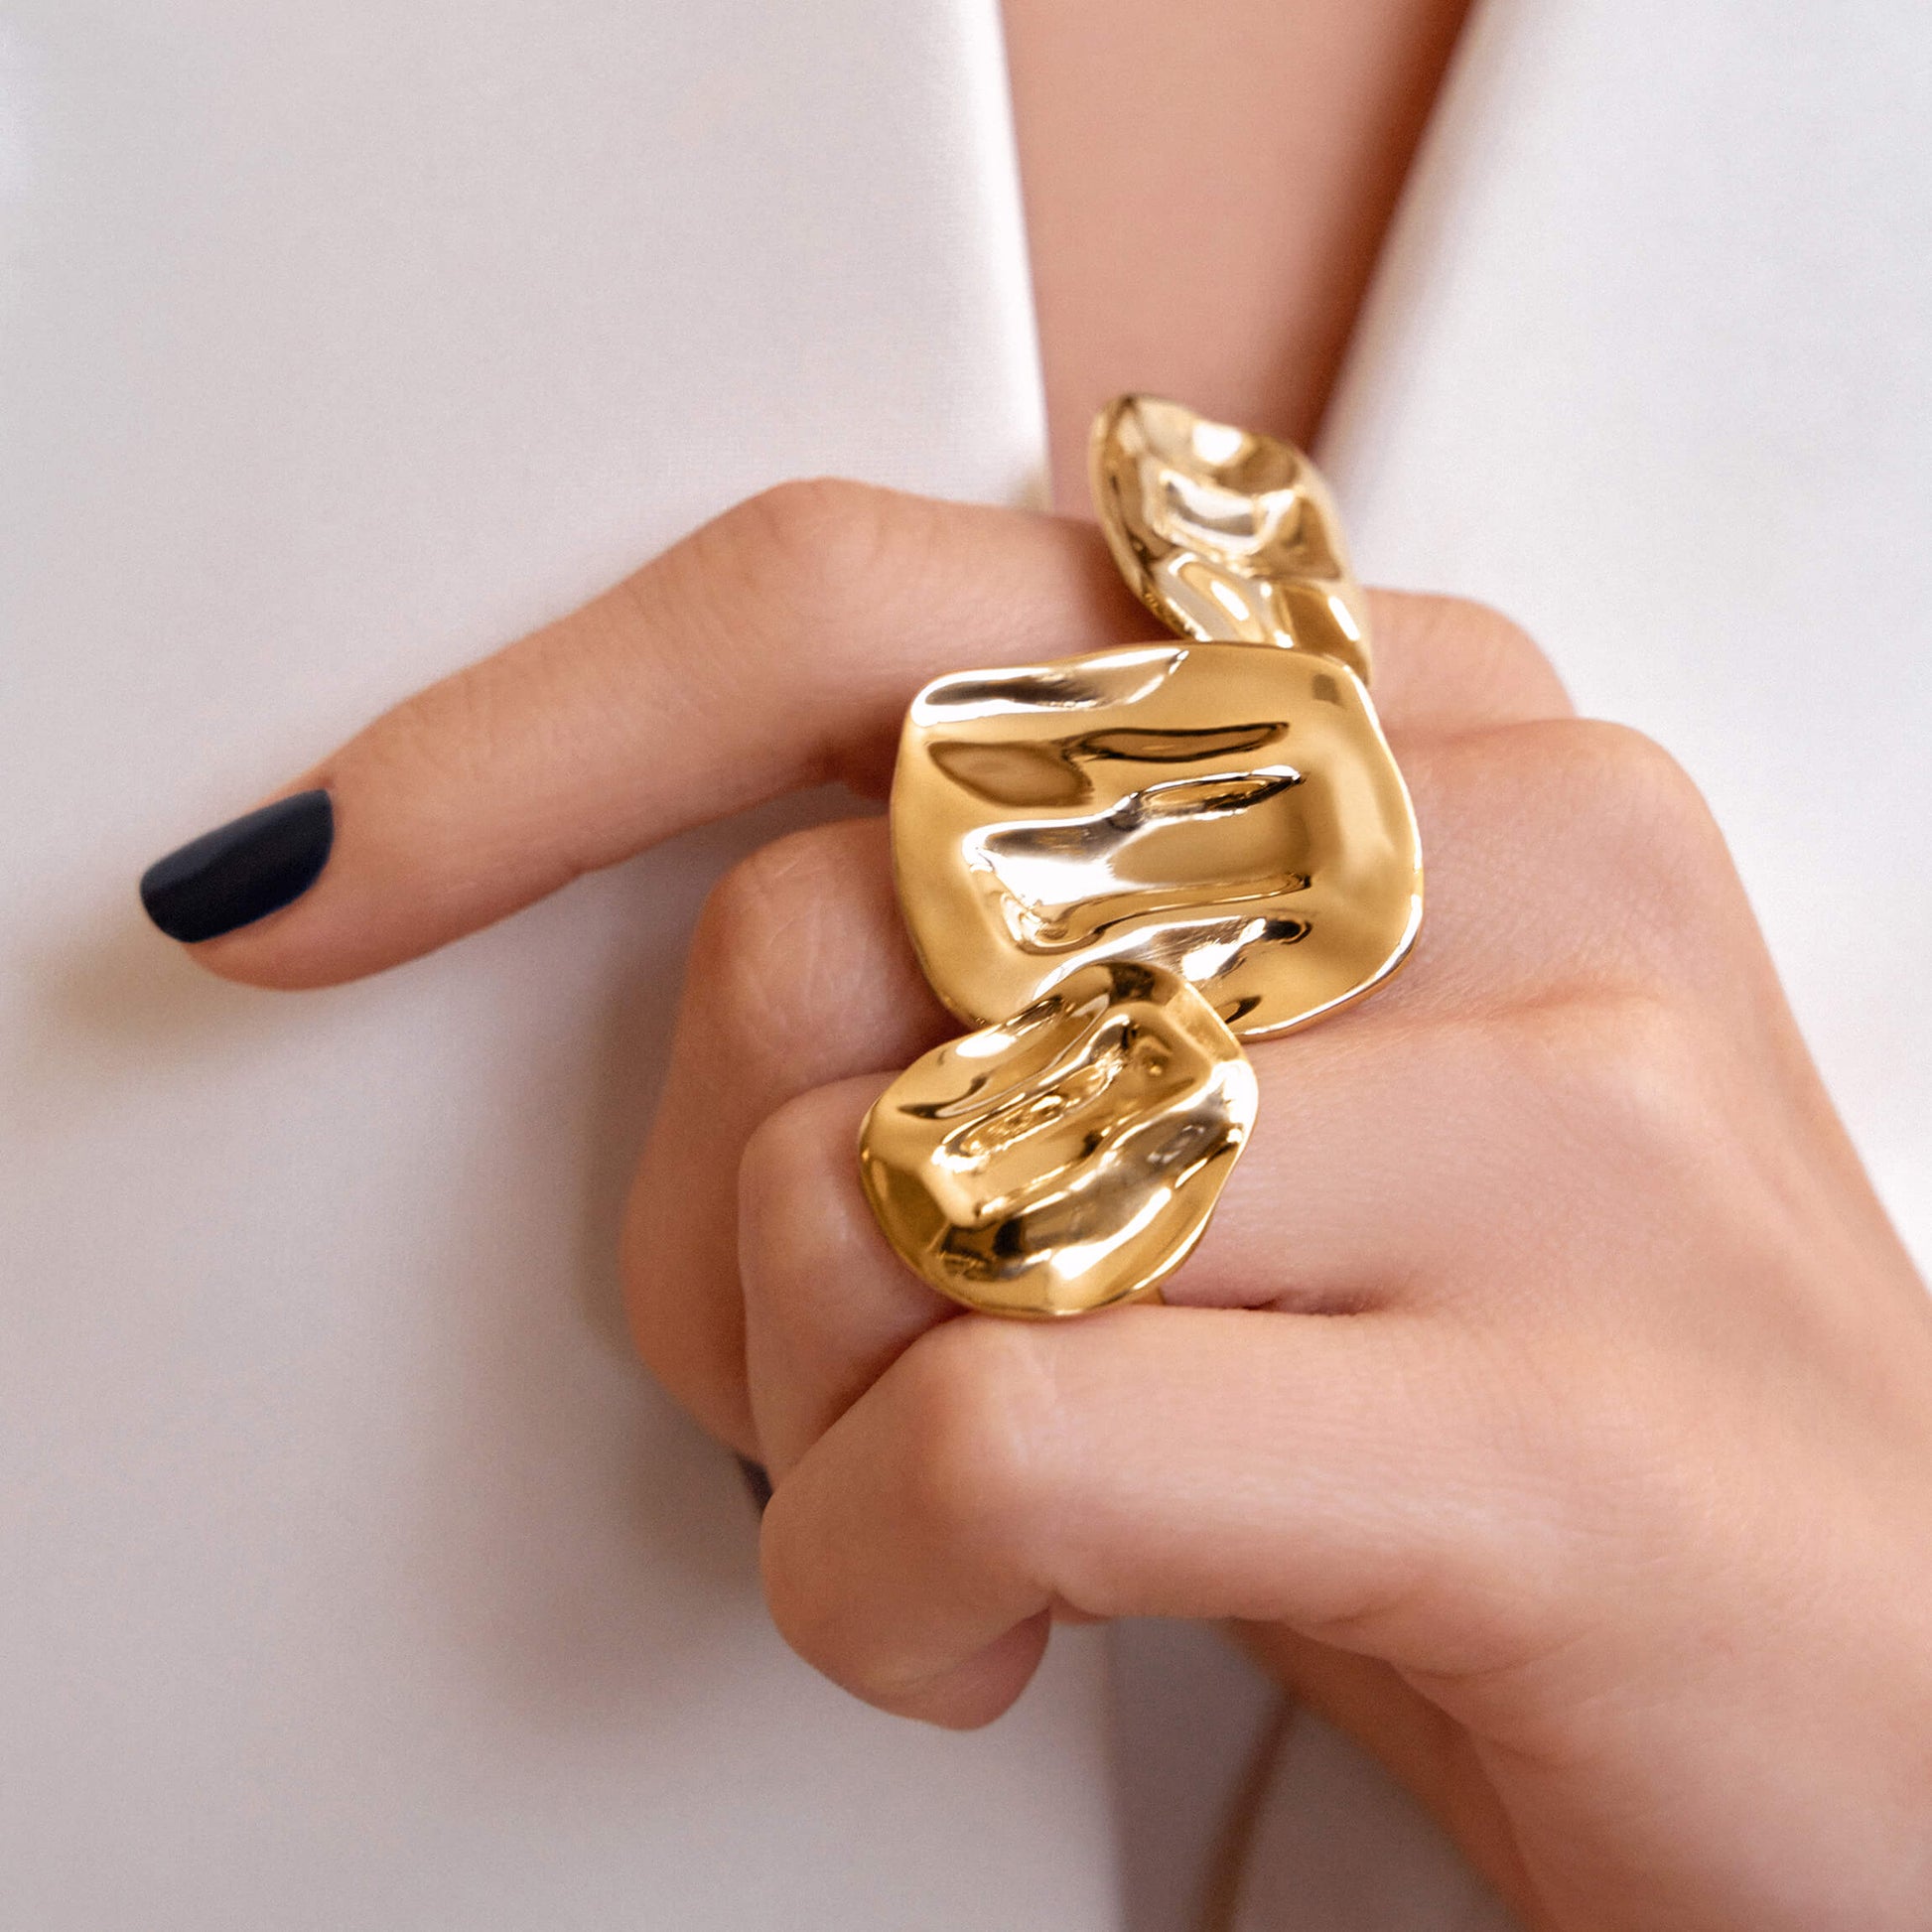 The Artist Palette Ring (L) is a Palette Ring -Brass -Makeup- made by Doublemoss Arte